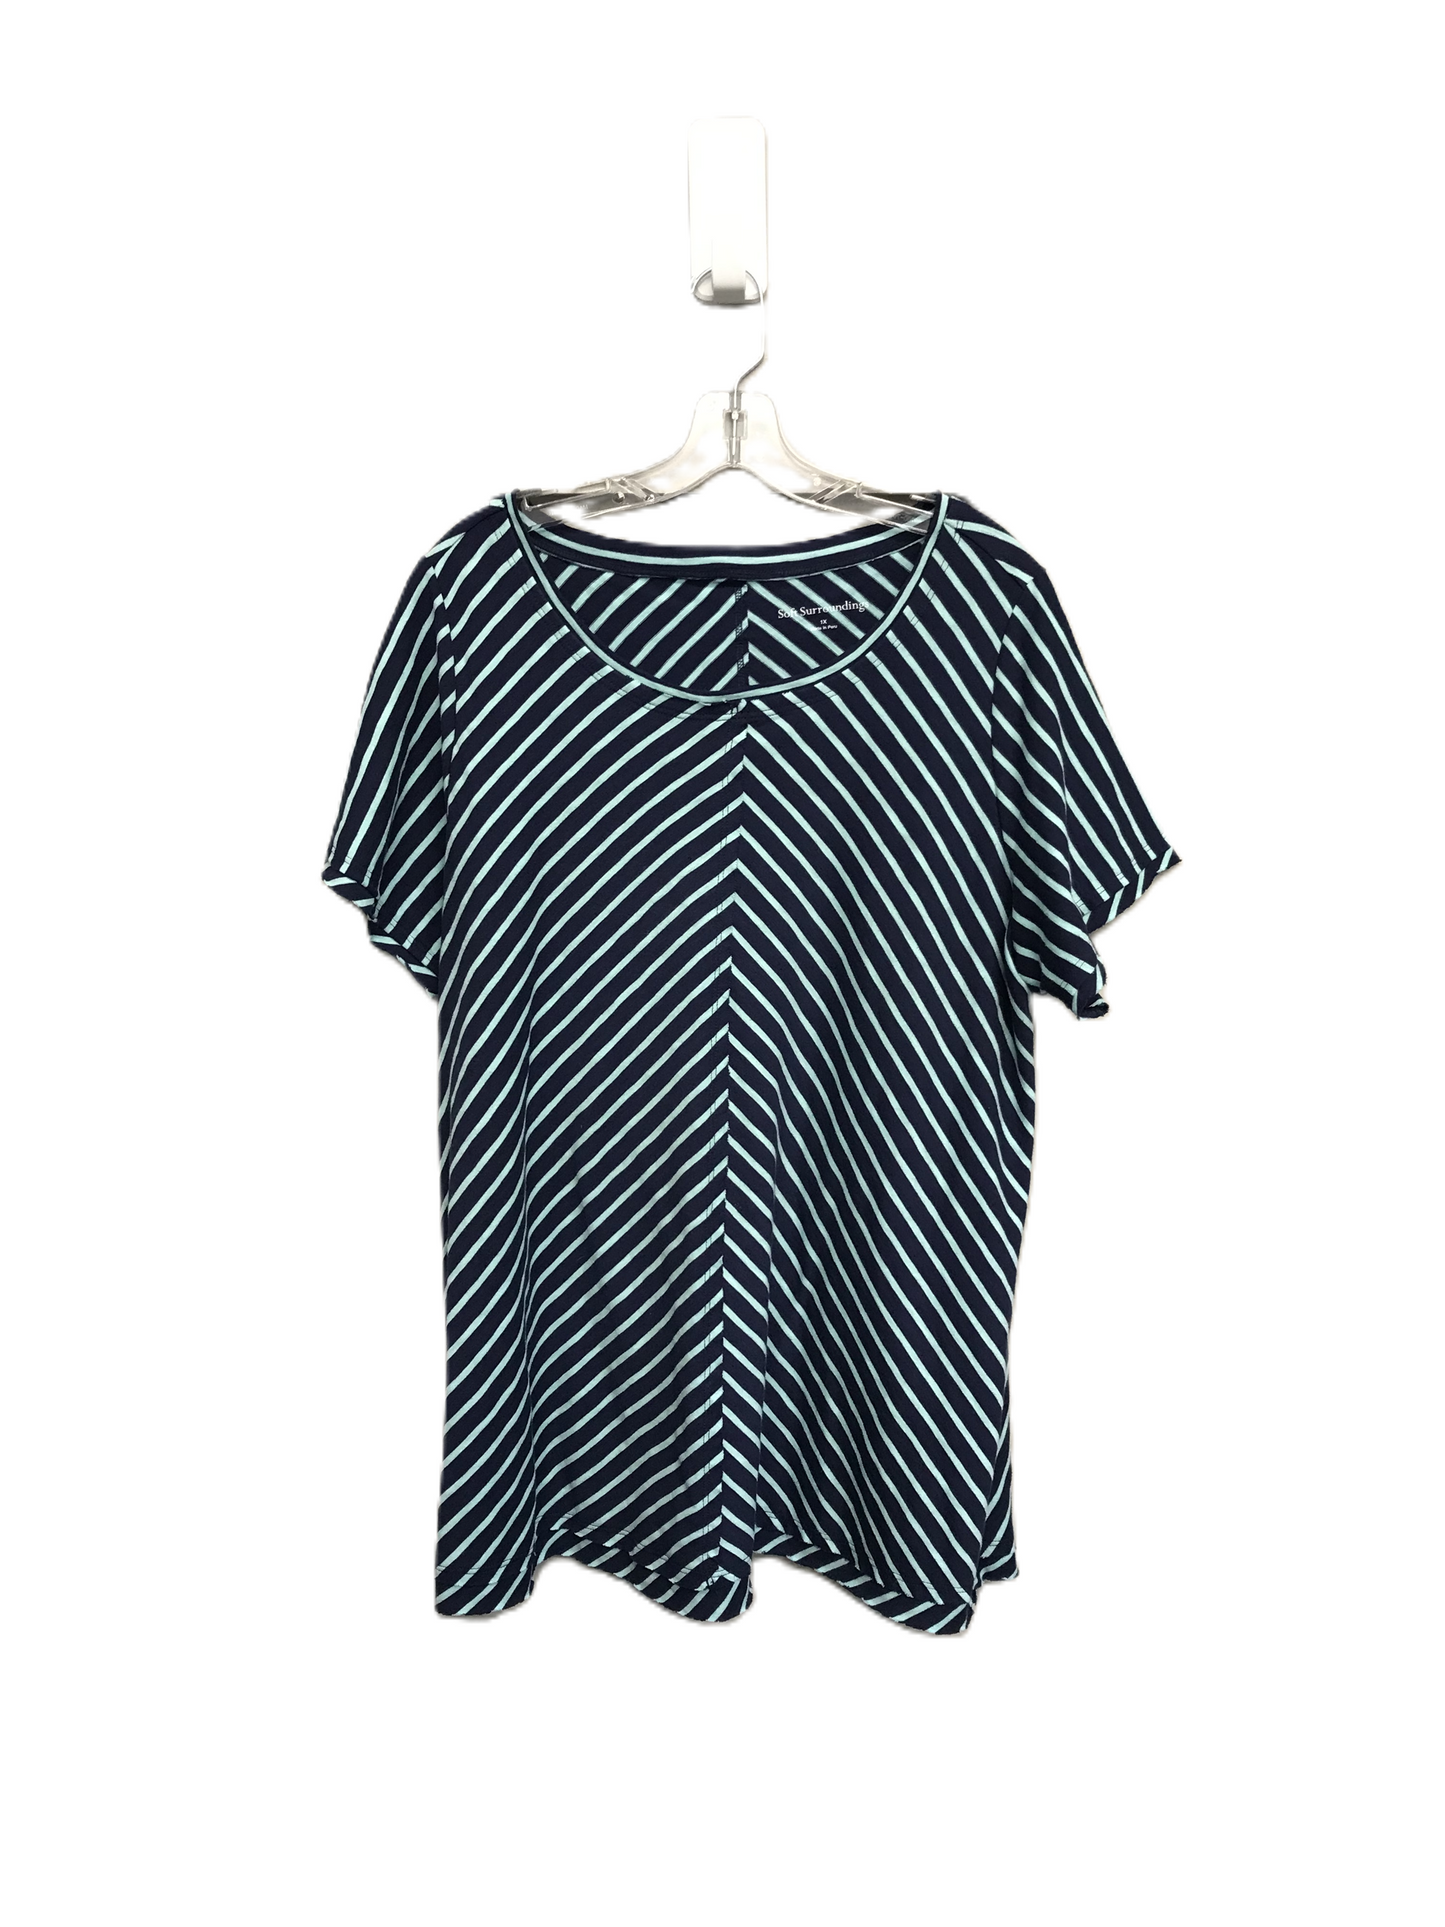 Striped Pattern Top Short Sleeve By Soft Surroundings, Size: 1x